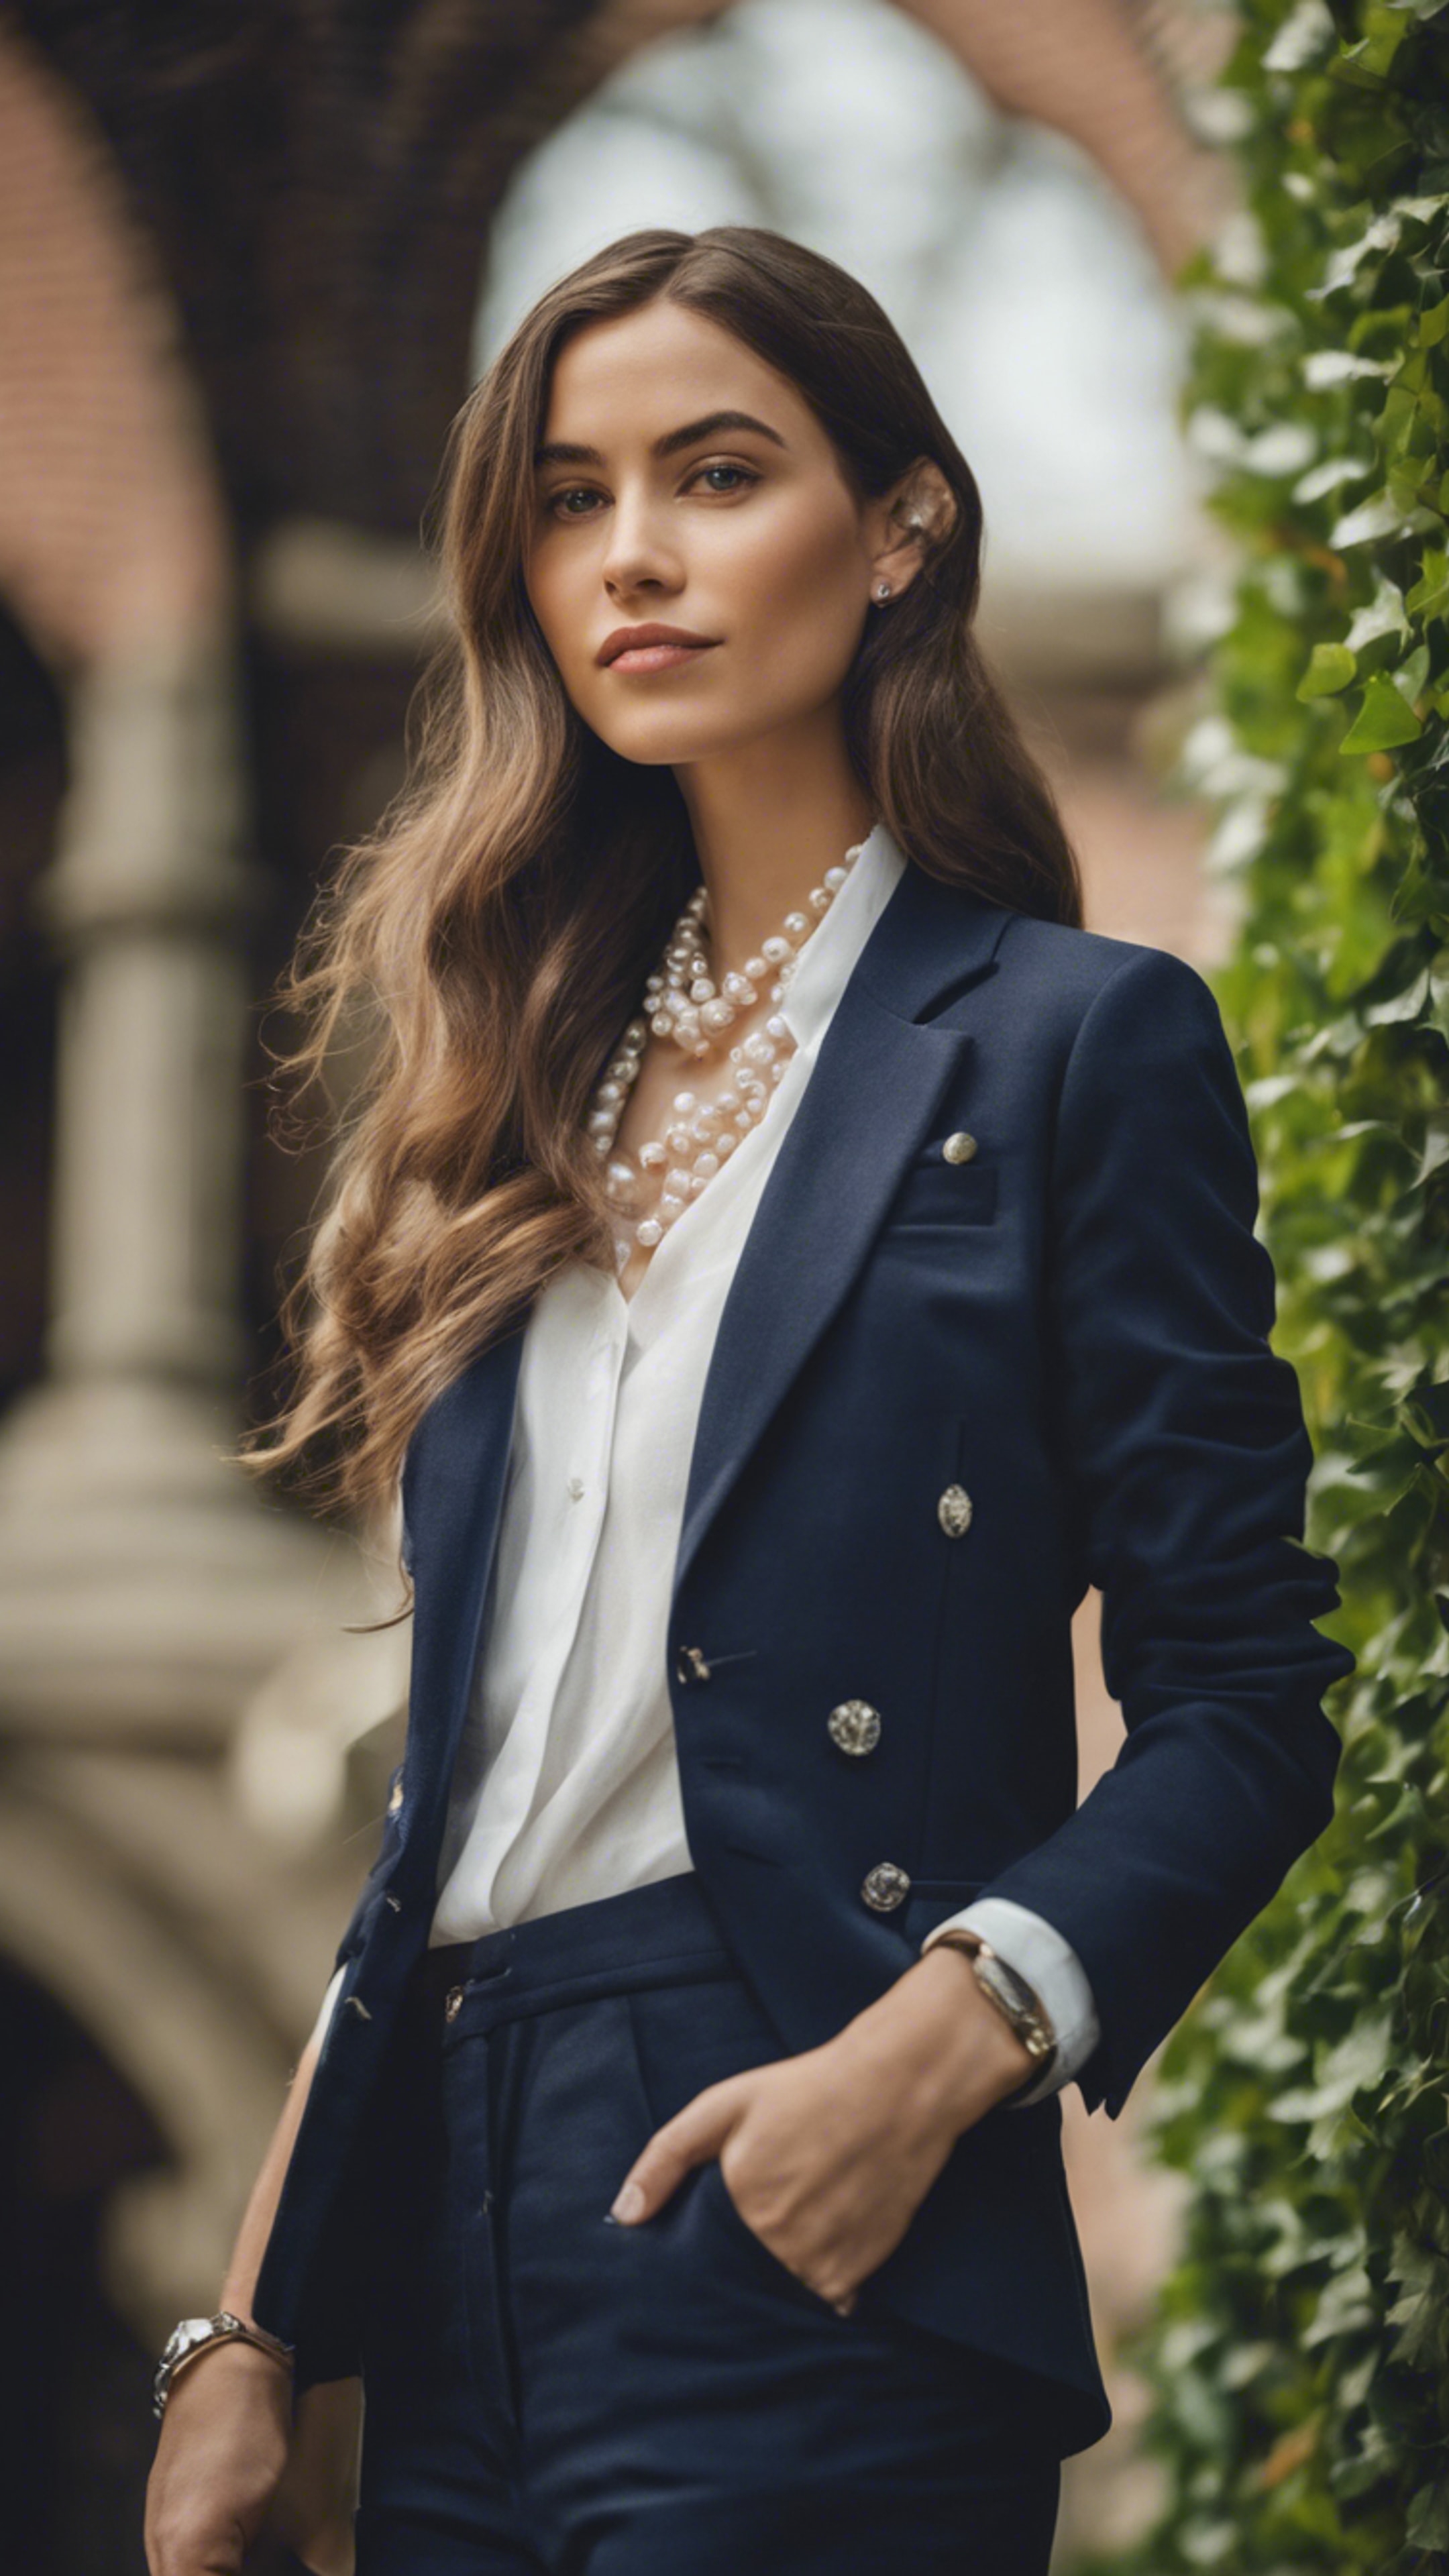 A portrait of a preppy woman in a navy blue blazer, pearl necklace, and a white linen shirt, posing in an Ivy League campus. ផ្ទាំង​រូបភាព[1775f808339c45cb81cf]